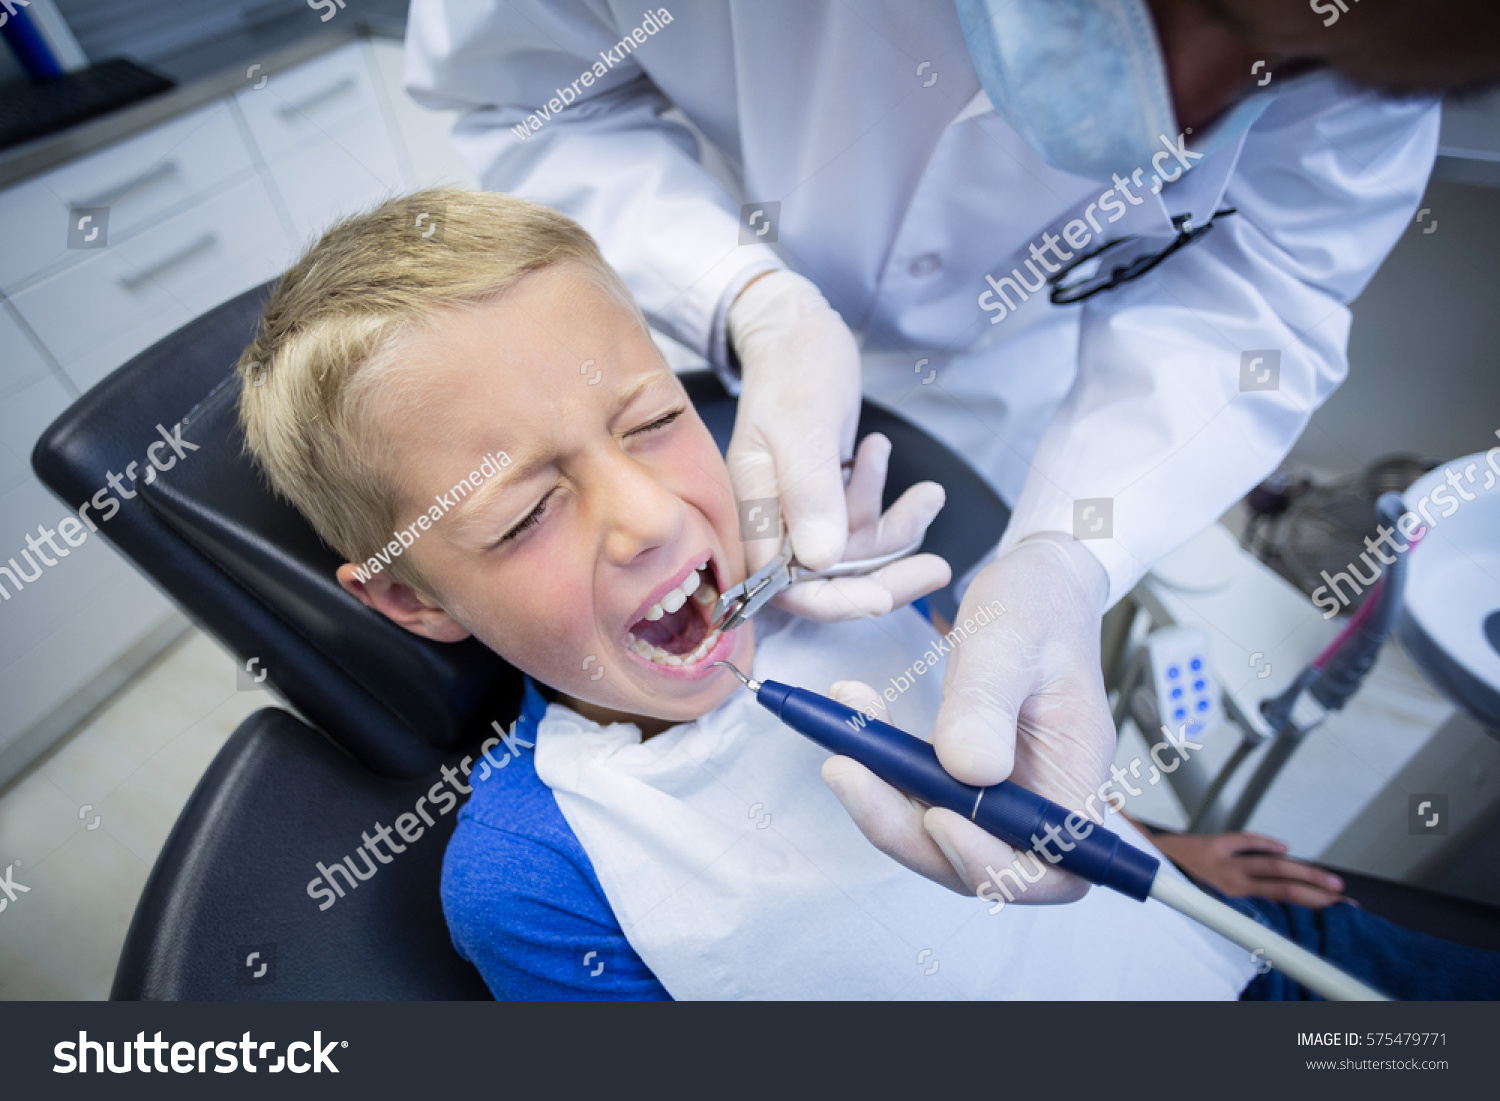 Dentist examining a young patient with tools at dental clinic #575479771